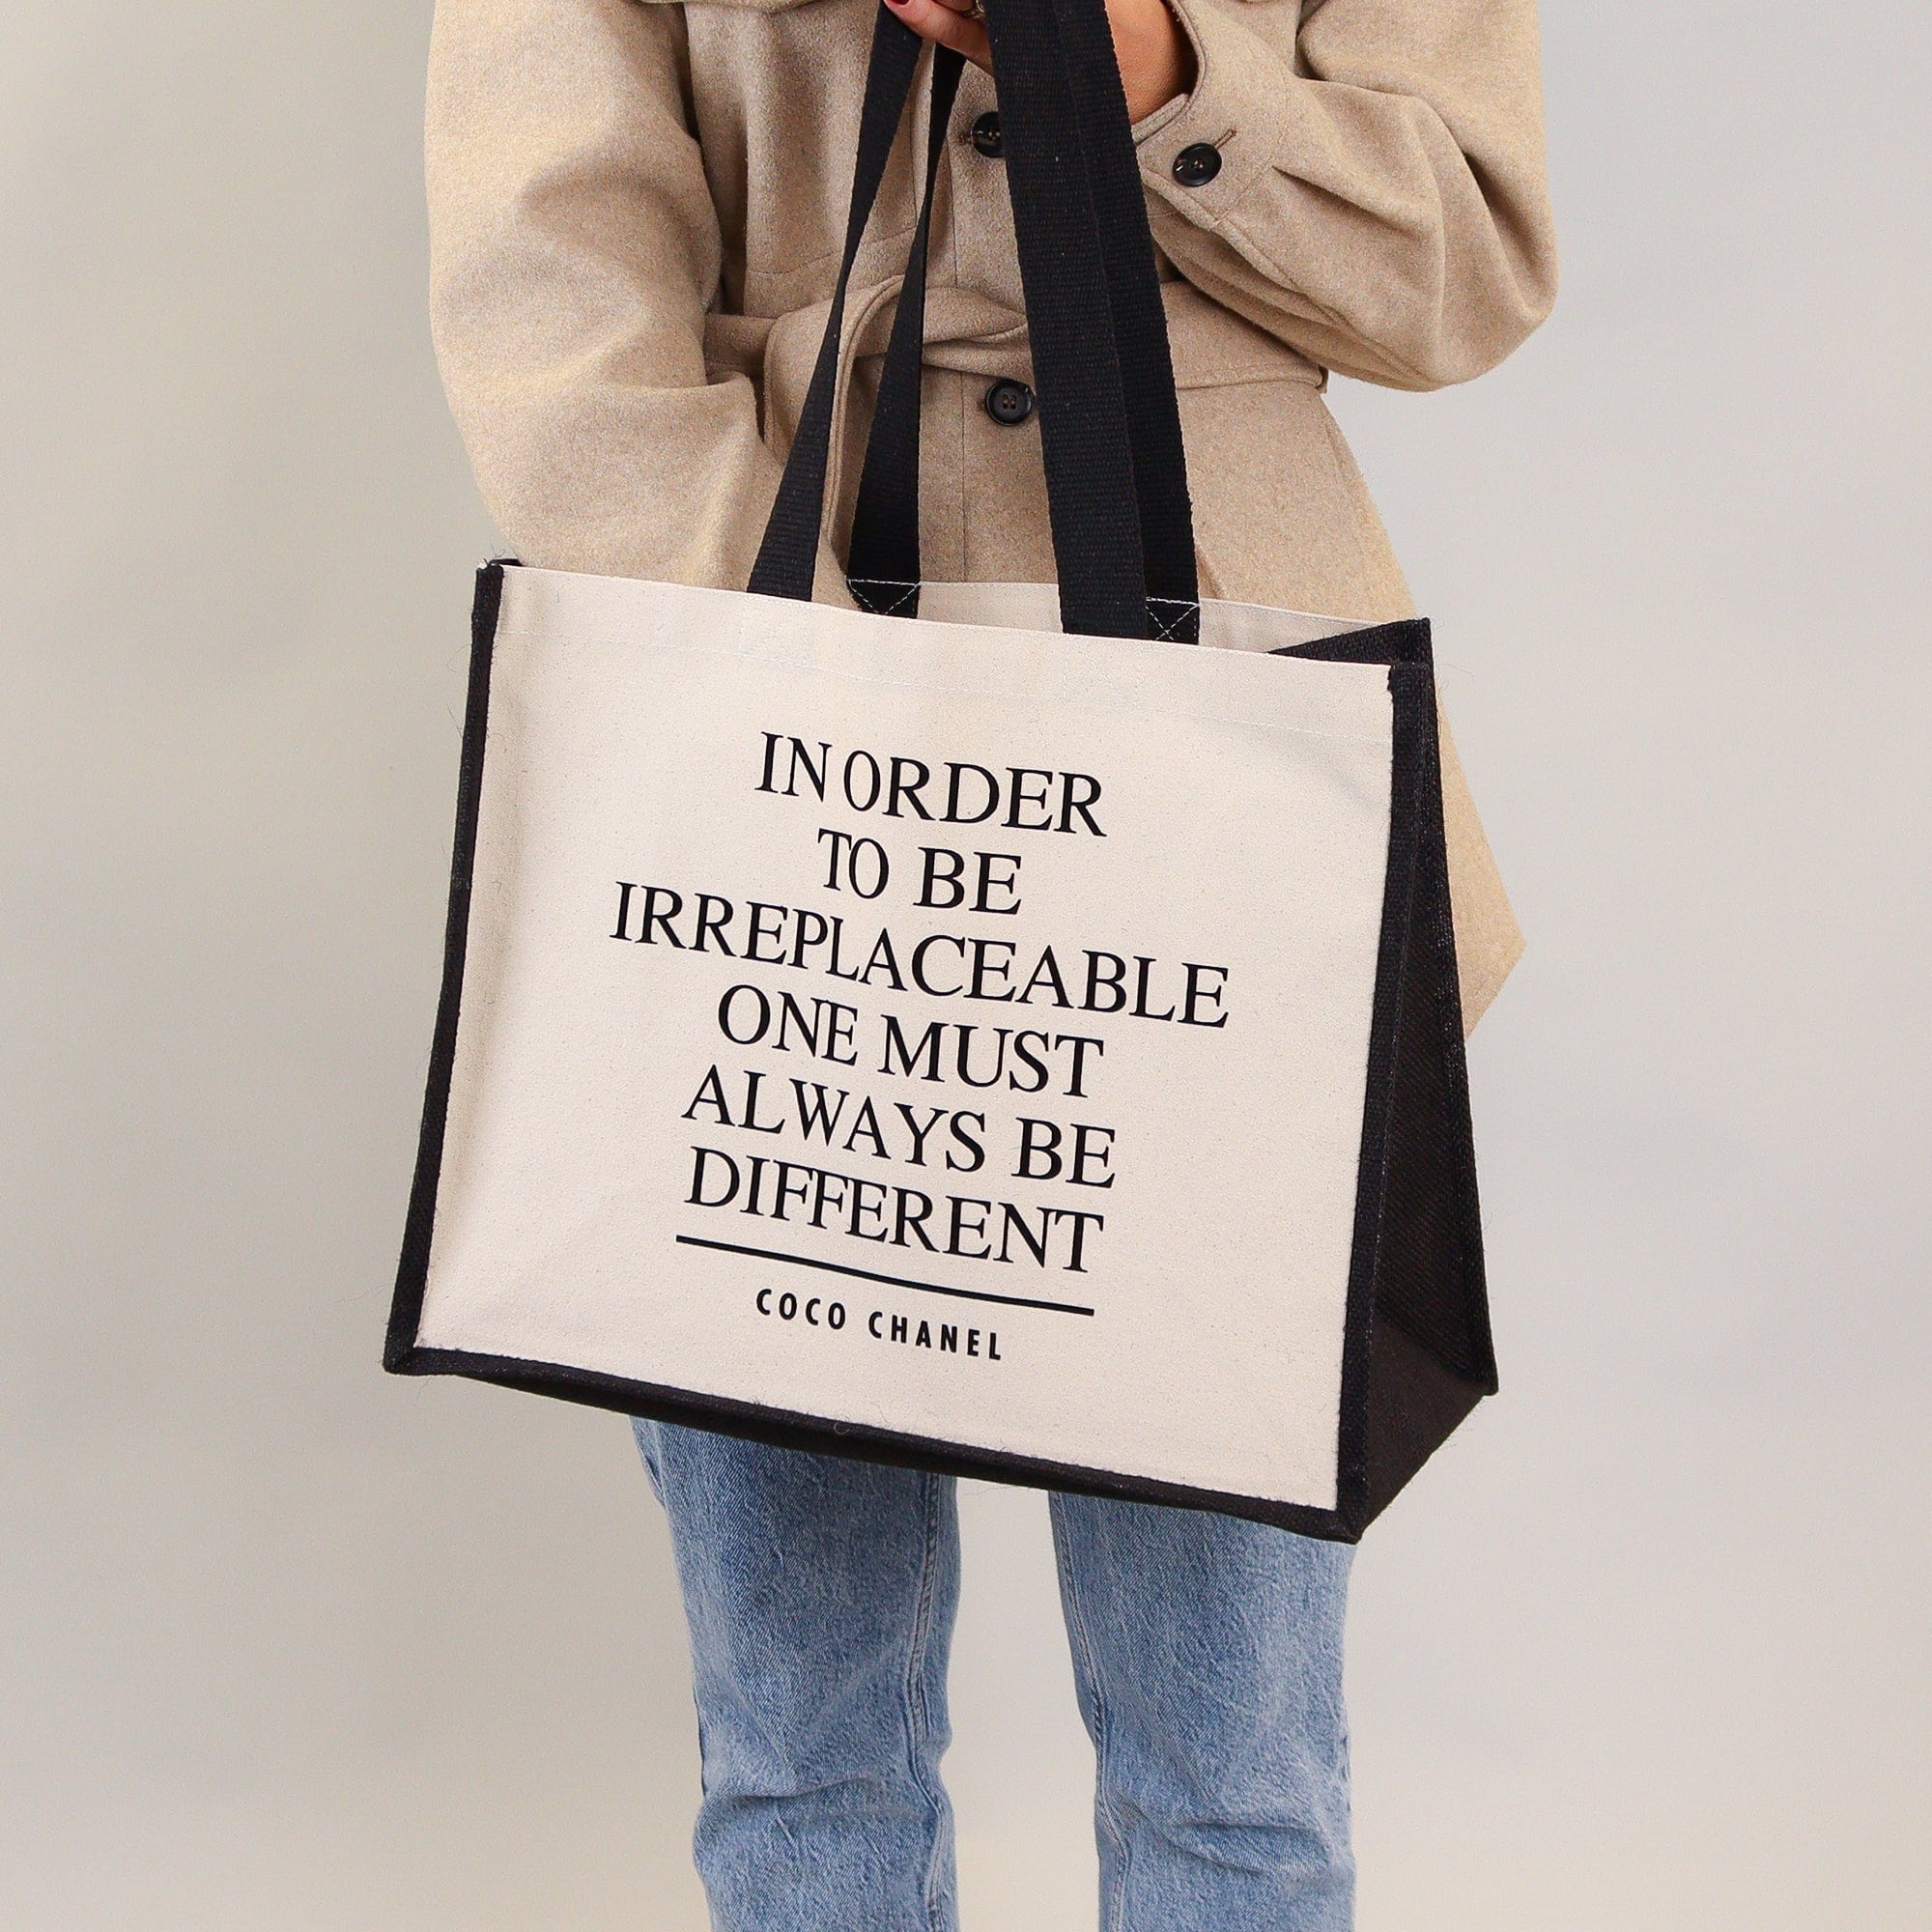 Dont Be Like the Rest of Them Darling Coco Chanel Quote Grunge Caps   printed tote bag designed by Toni Scott  Buy on Artwowco